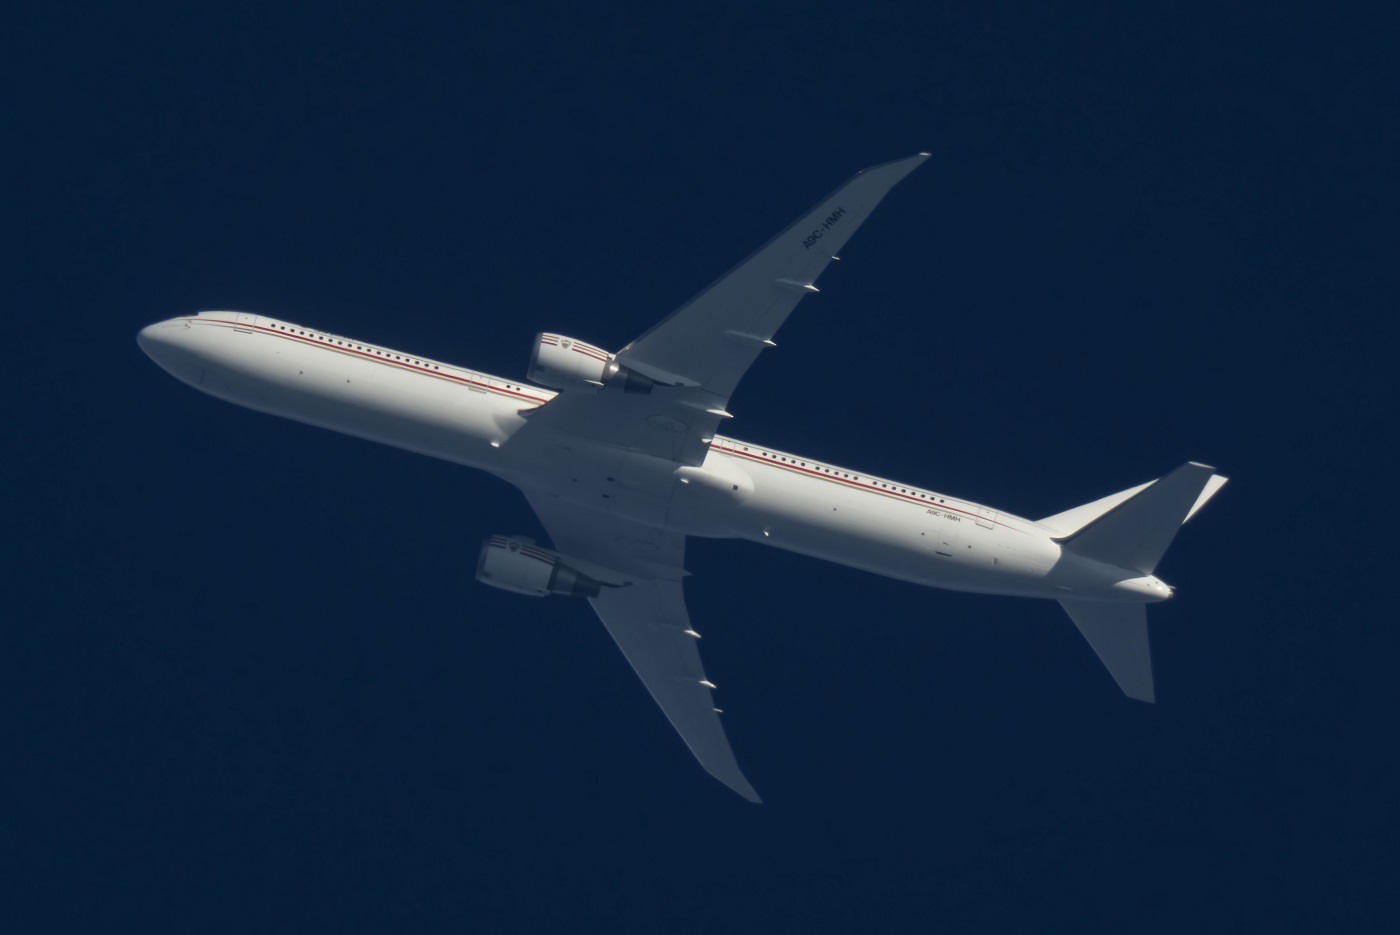 Bahrain Amiri Flight 764 (A9C-HMH) flying at 32,000 ft from NCE to FRA